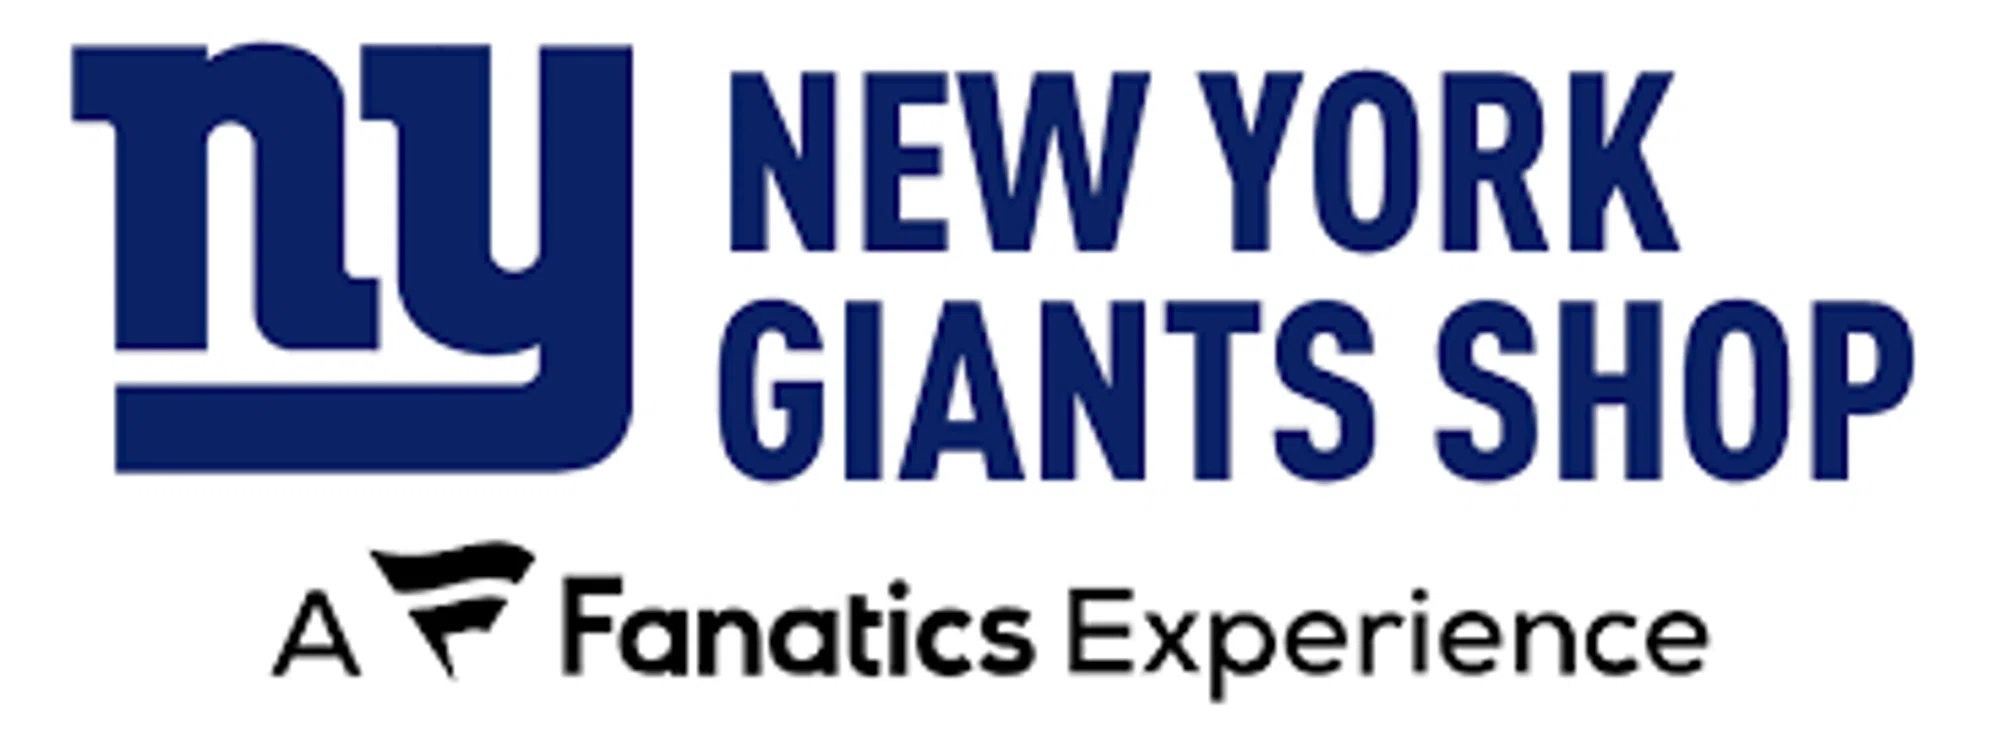 New York Giants Shop Review  Shop.giants.com Ratings & Customer Reviews –  Oct '23